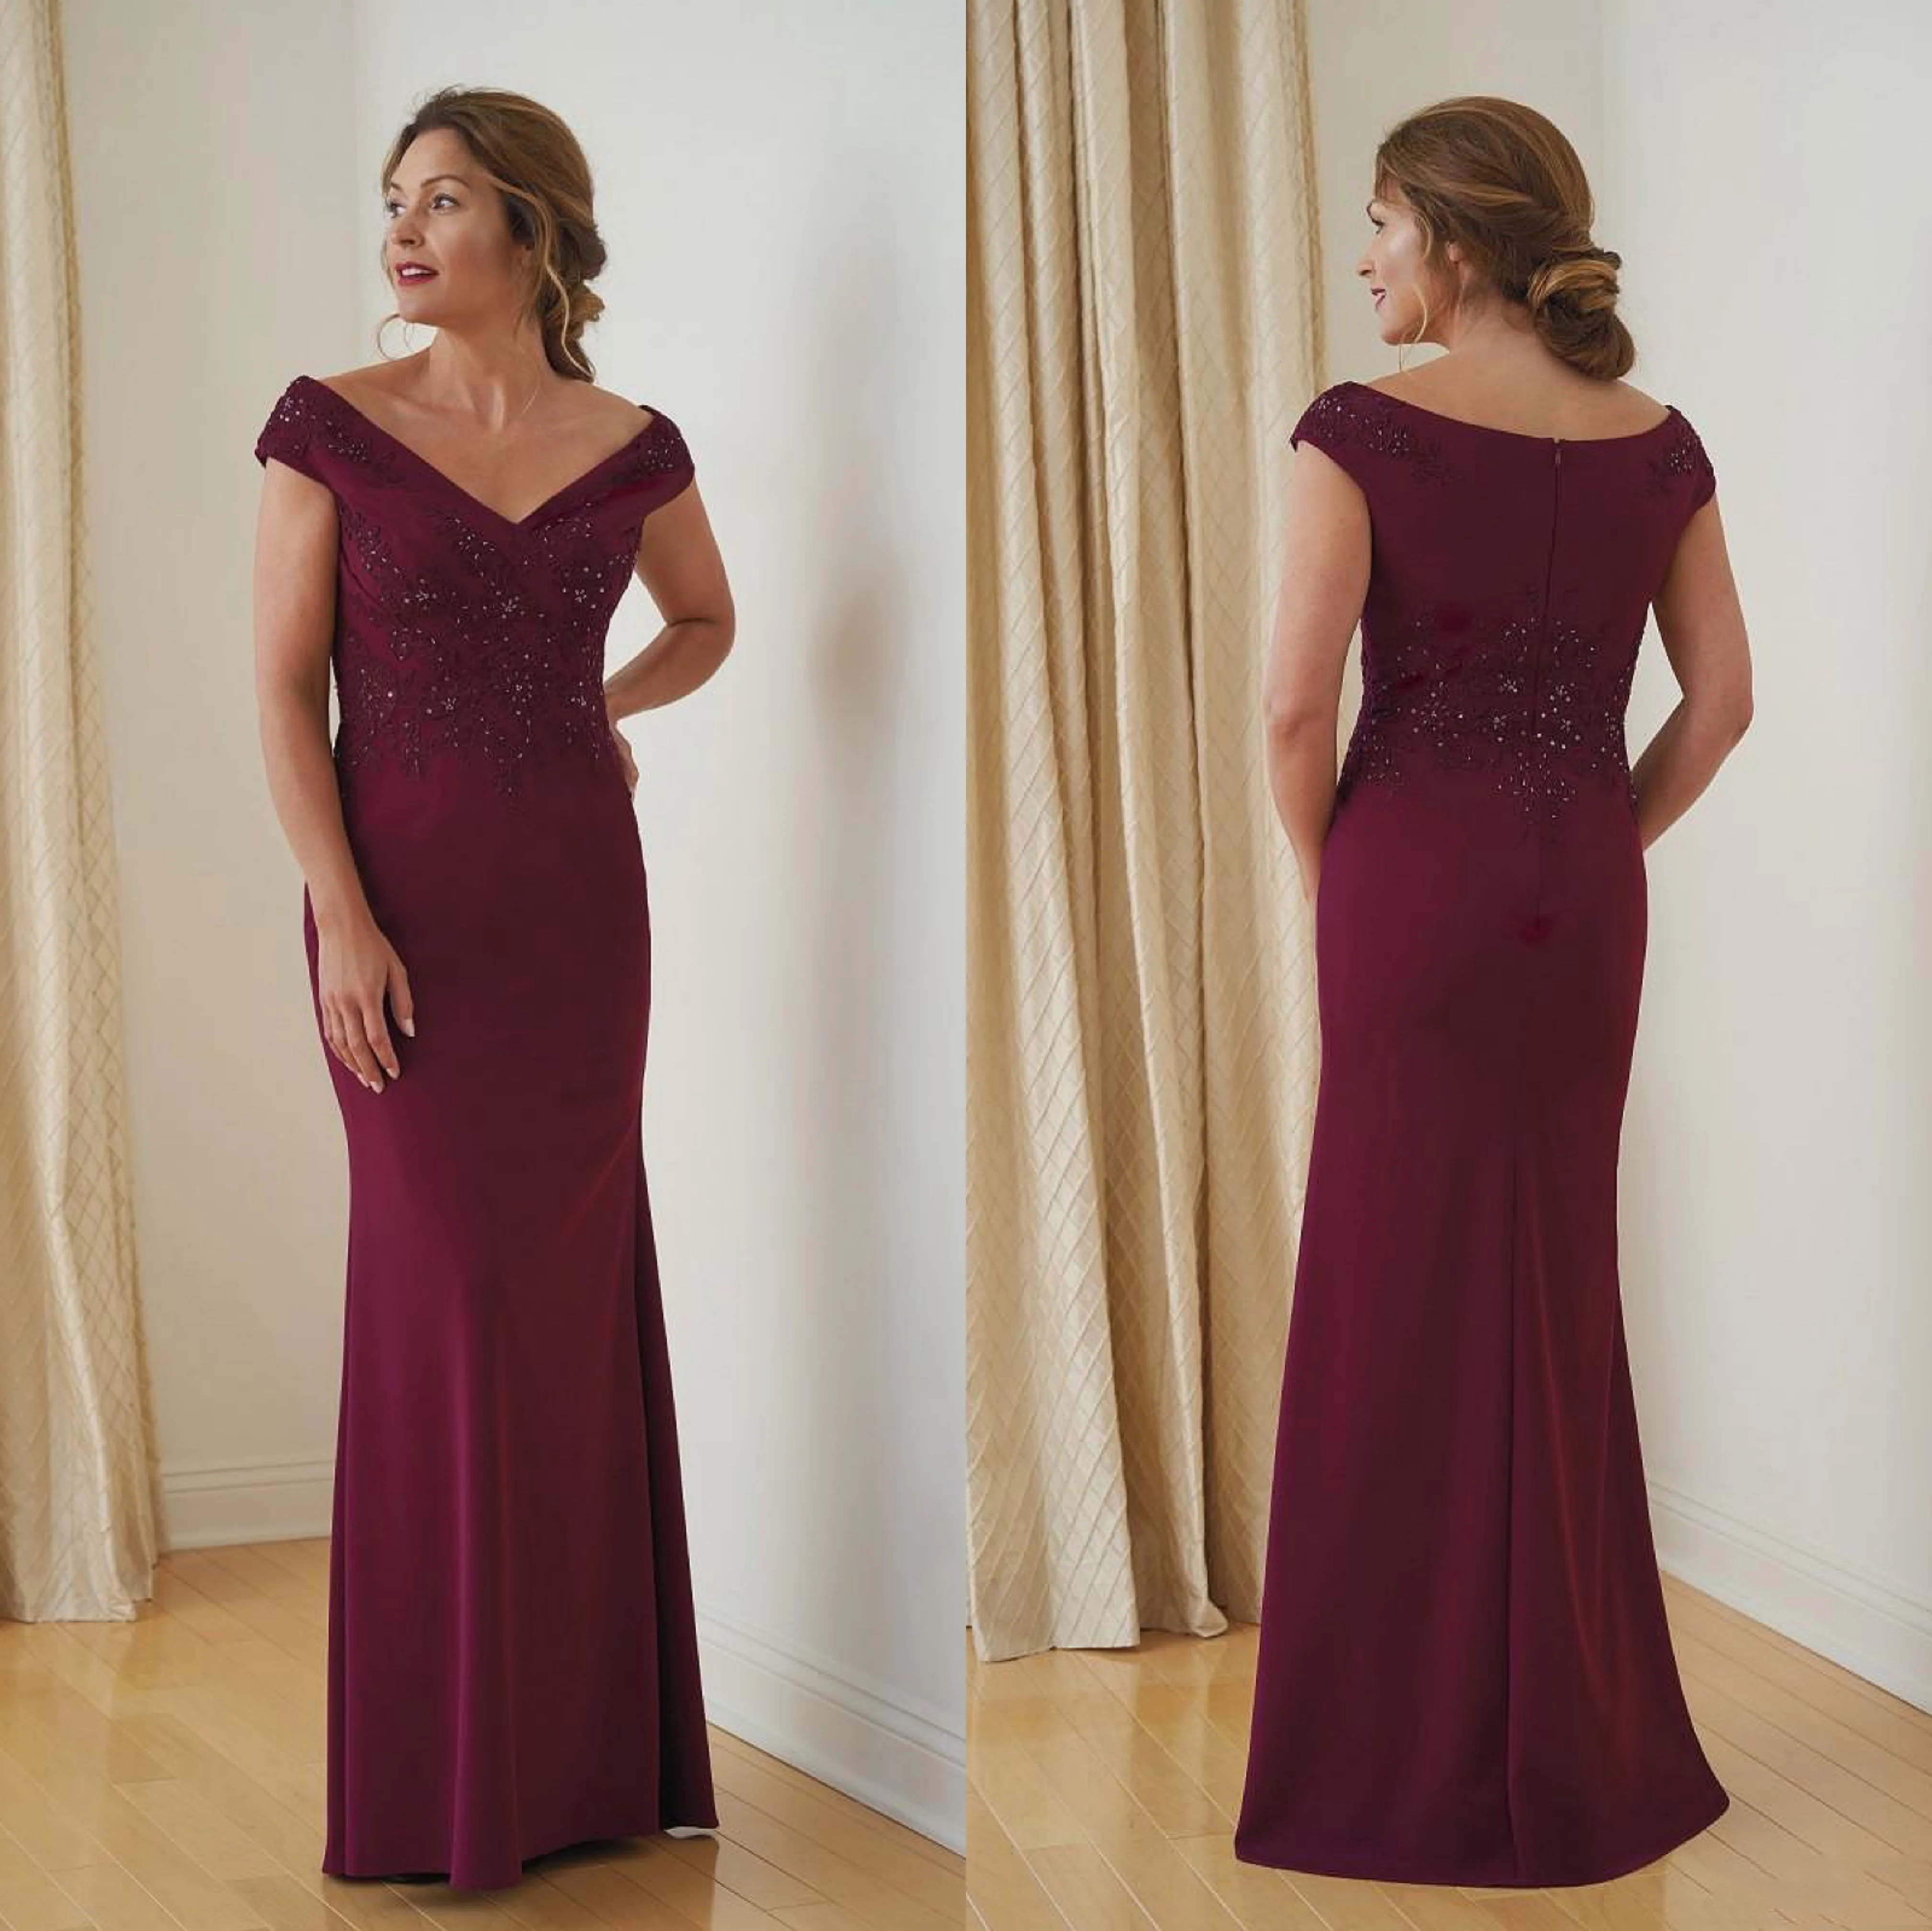 New Burgundy Mother of the Bride Dresses Mermaid Boat Neck Beaded Lace Formal Wedding Banquet Party Guest Mother Evening Dresses